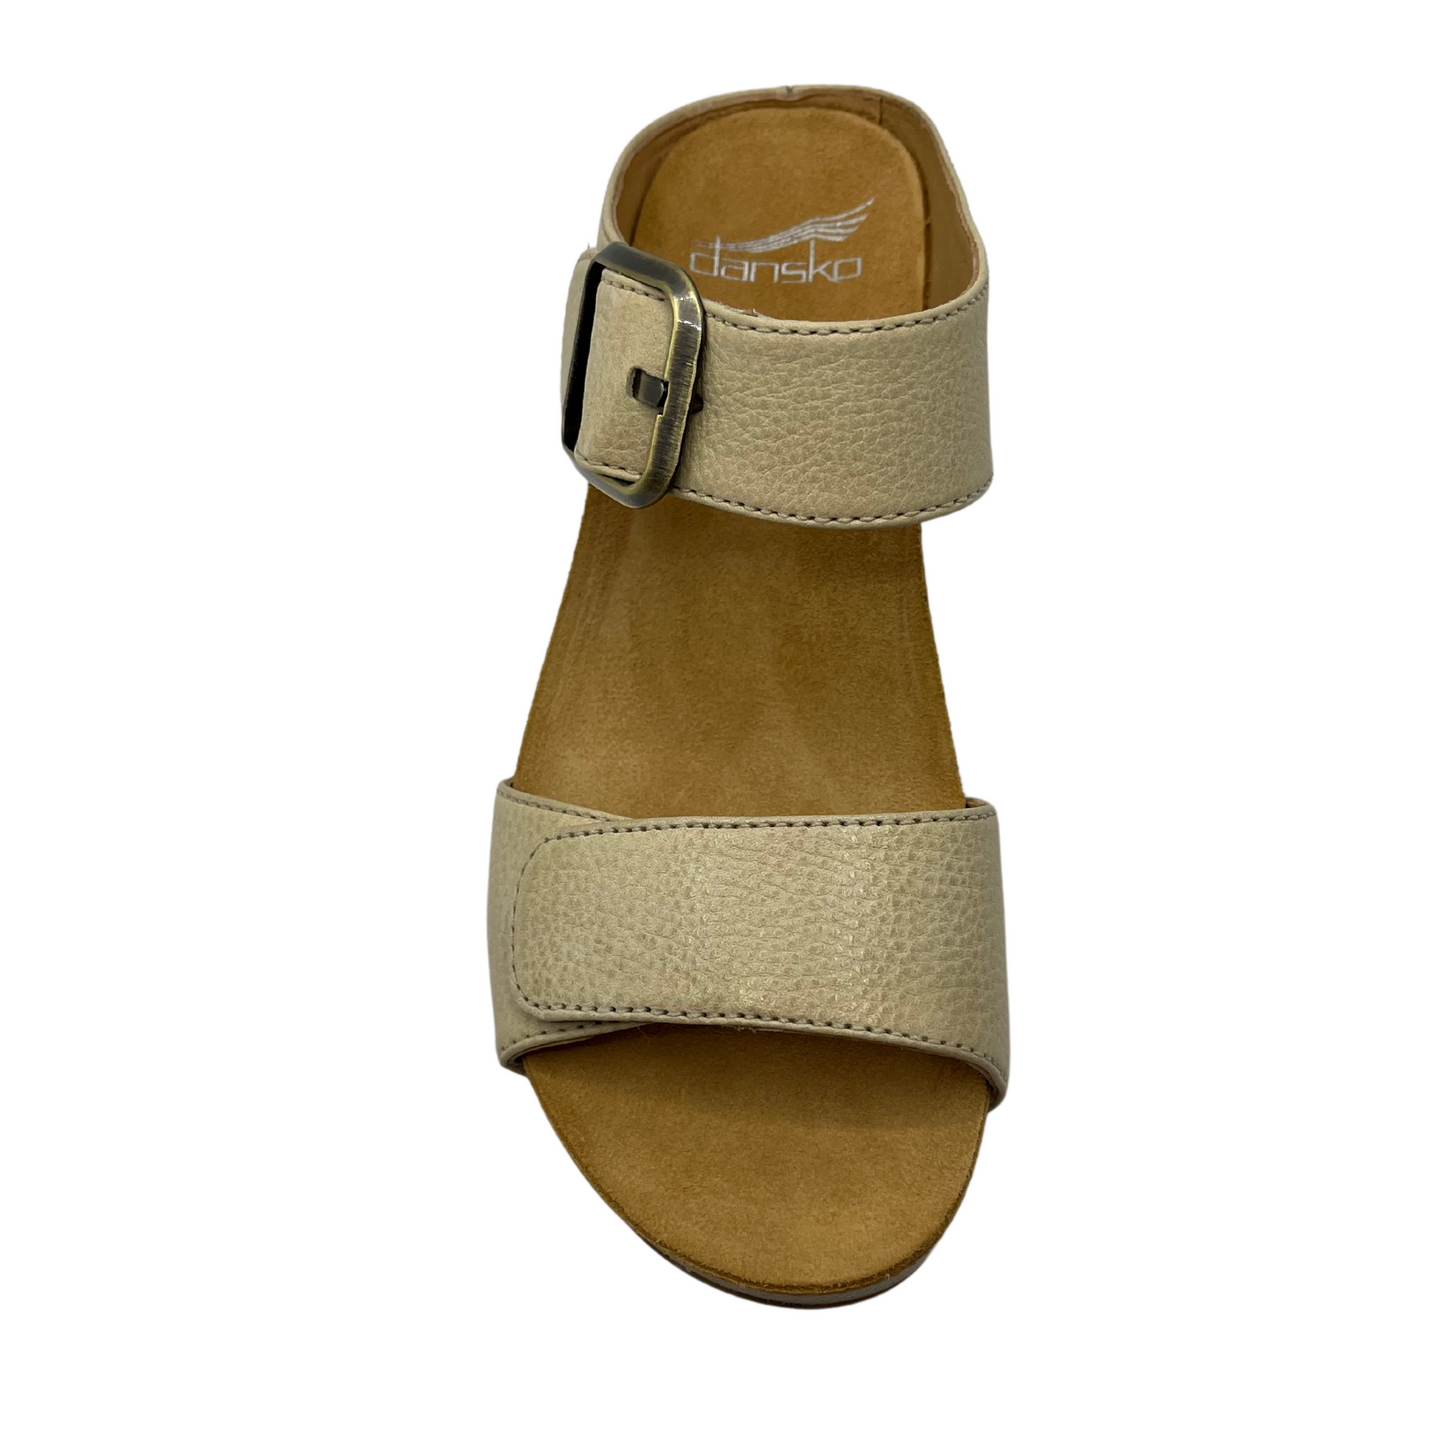 Top view of linen leather sandal with gold buckle strap and rounded sole